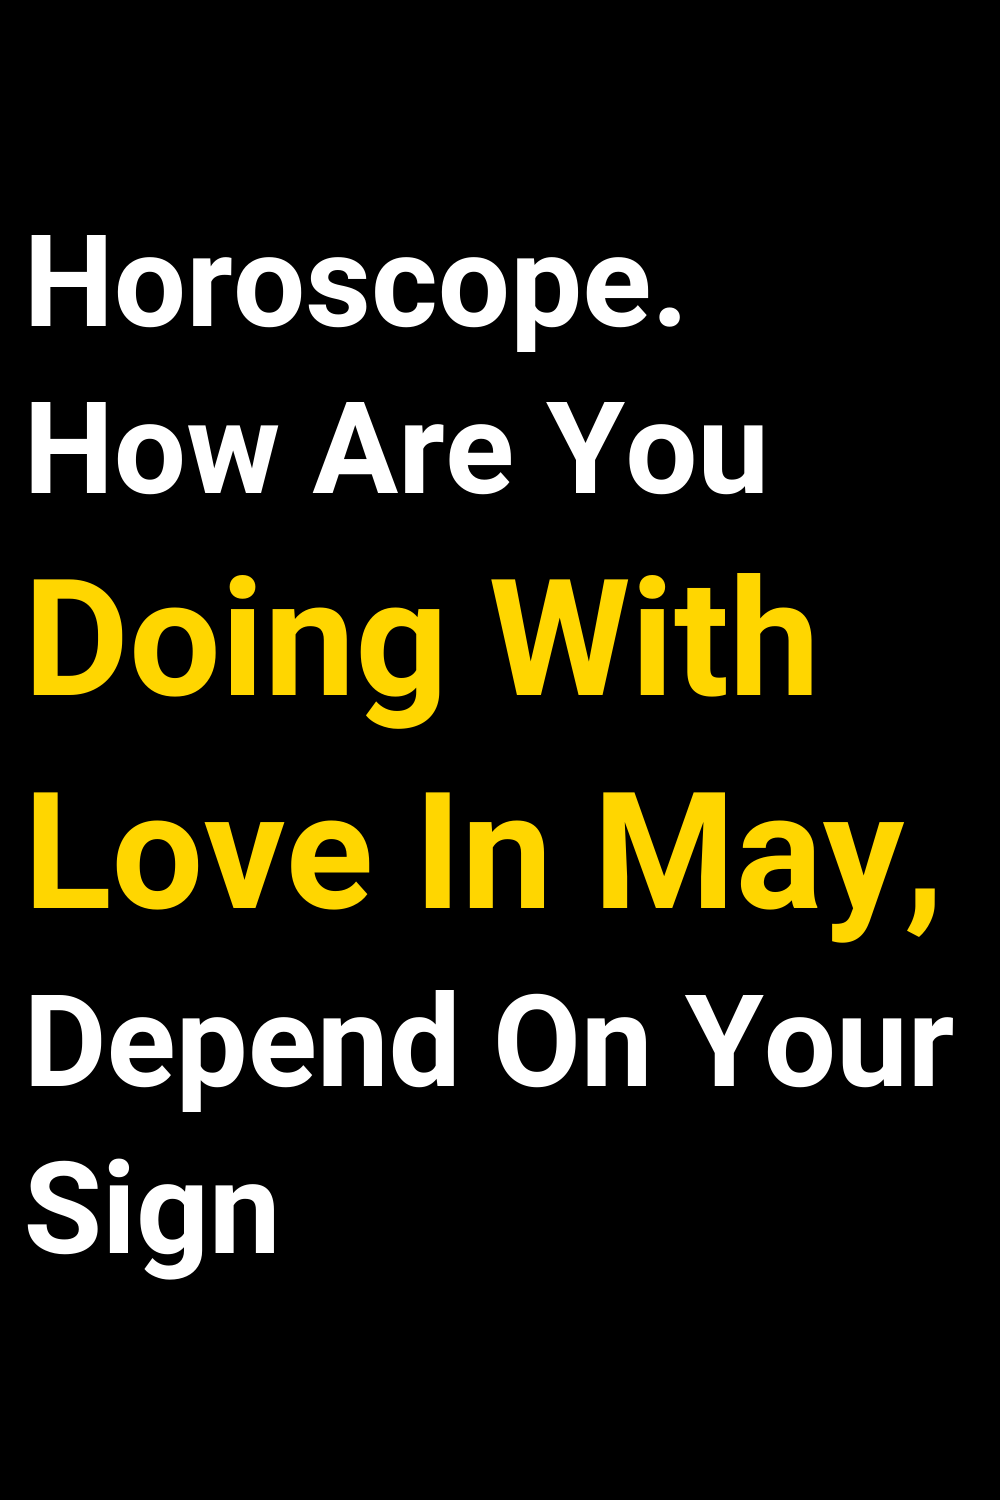 Horoscope. How Are You Doing With Love In May, Depend On Your Sign